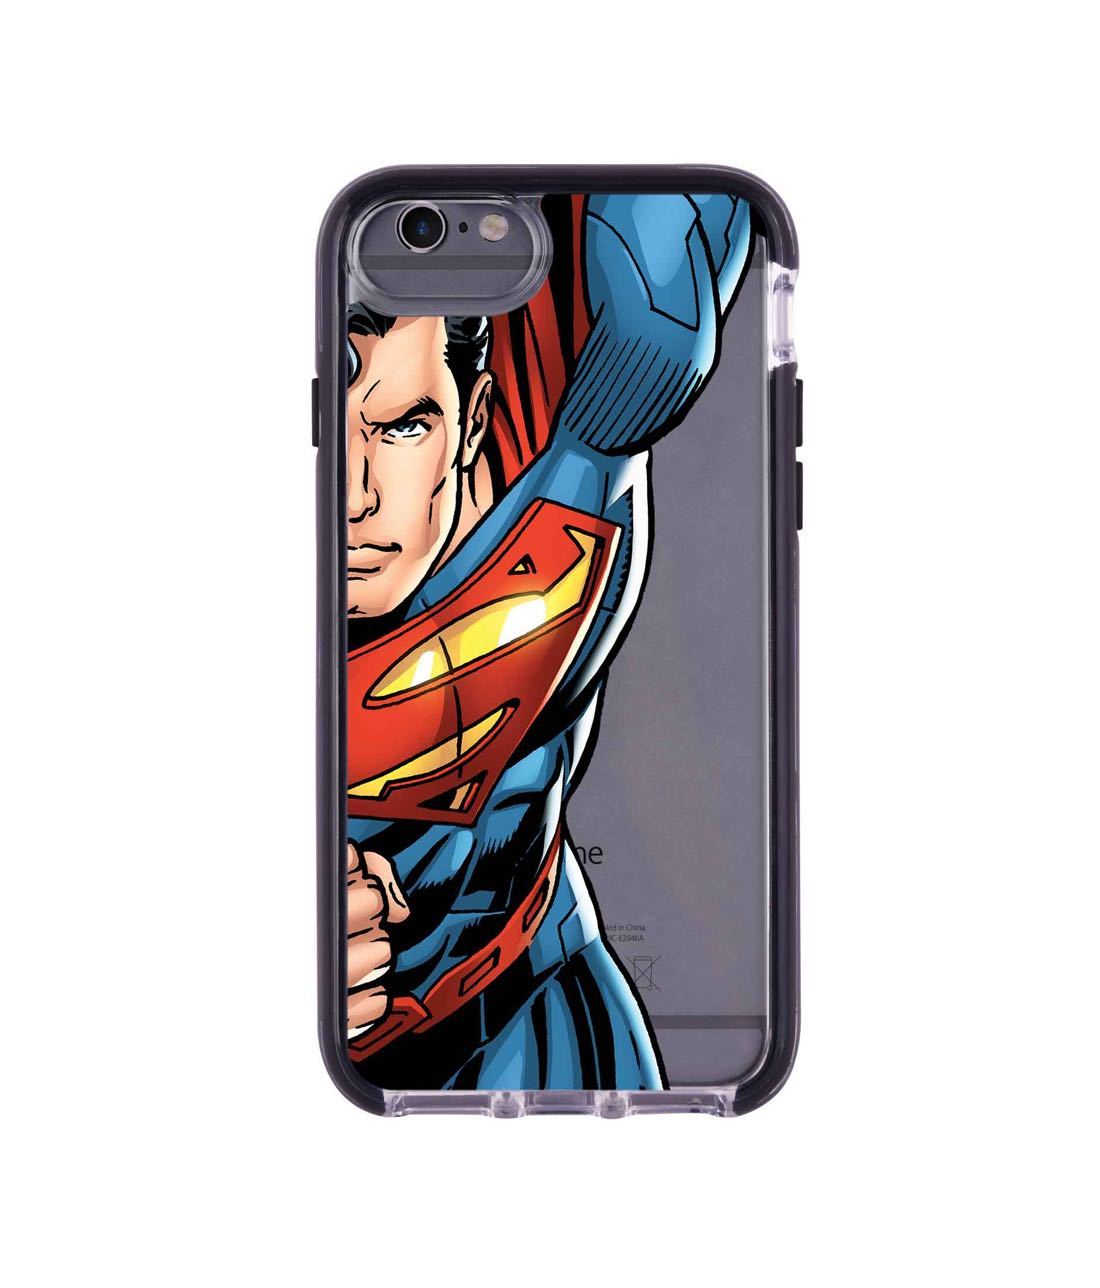 Speed it like Superman - Extreme Phone Case for iPhone 6S Plus